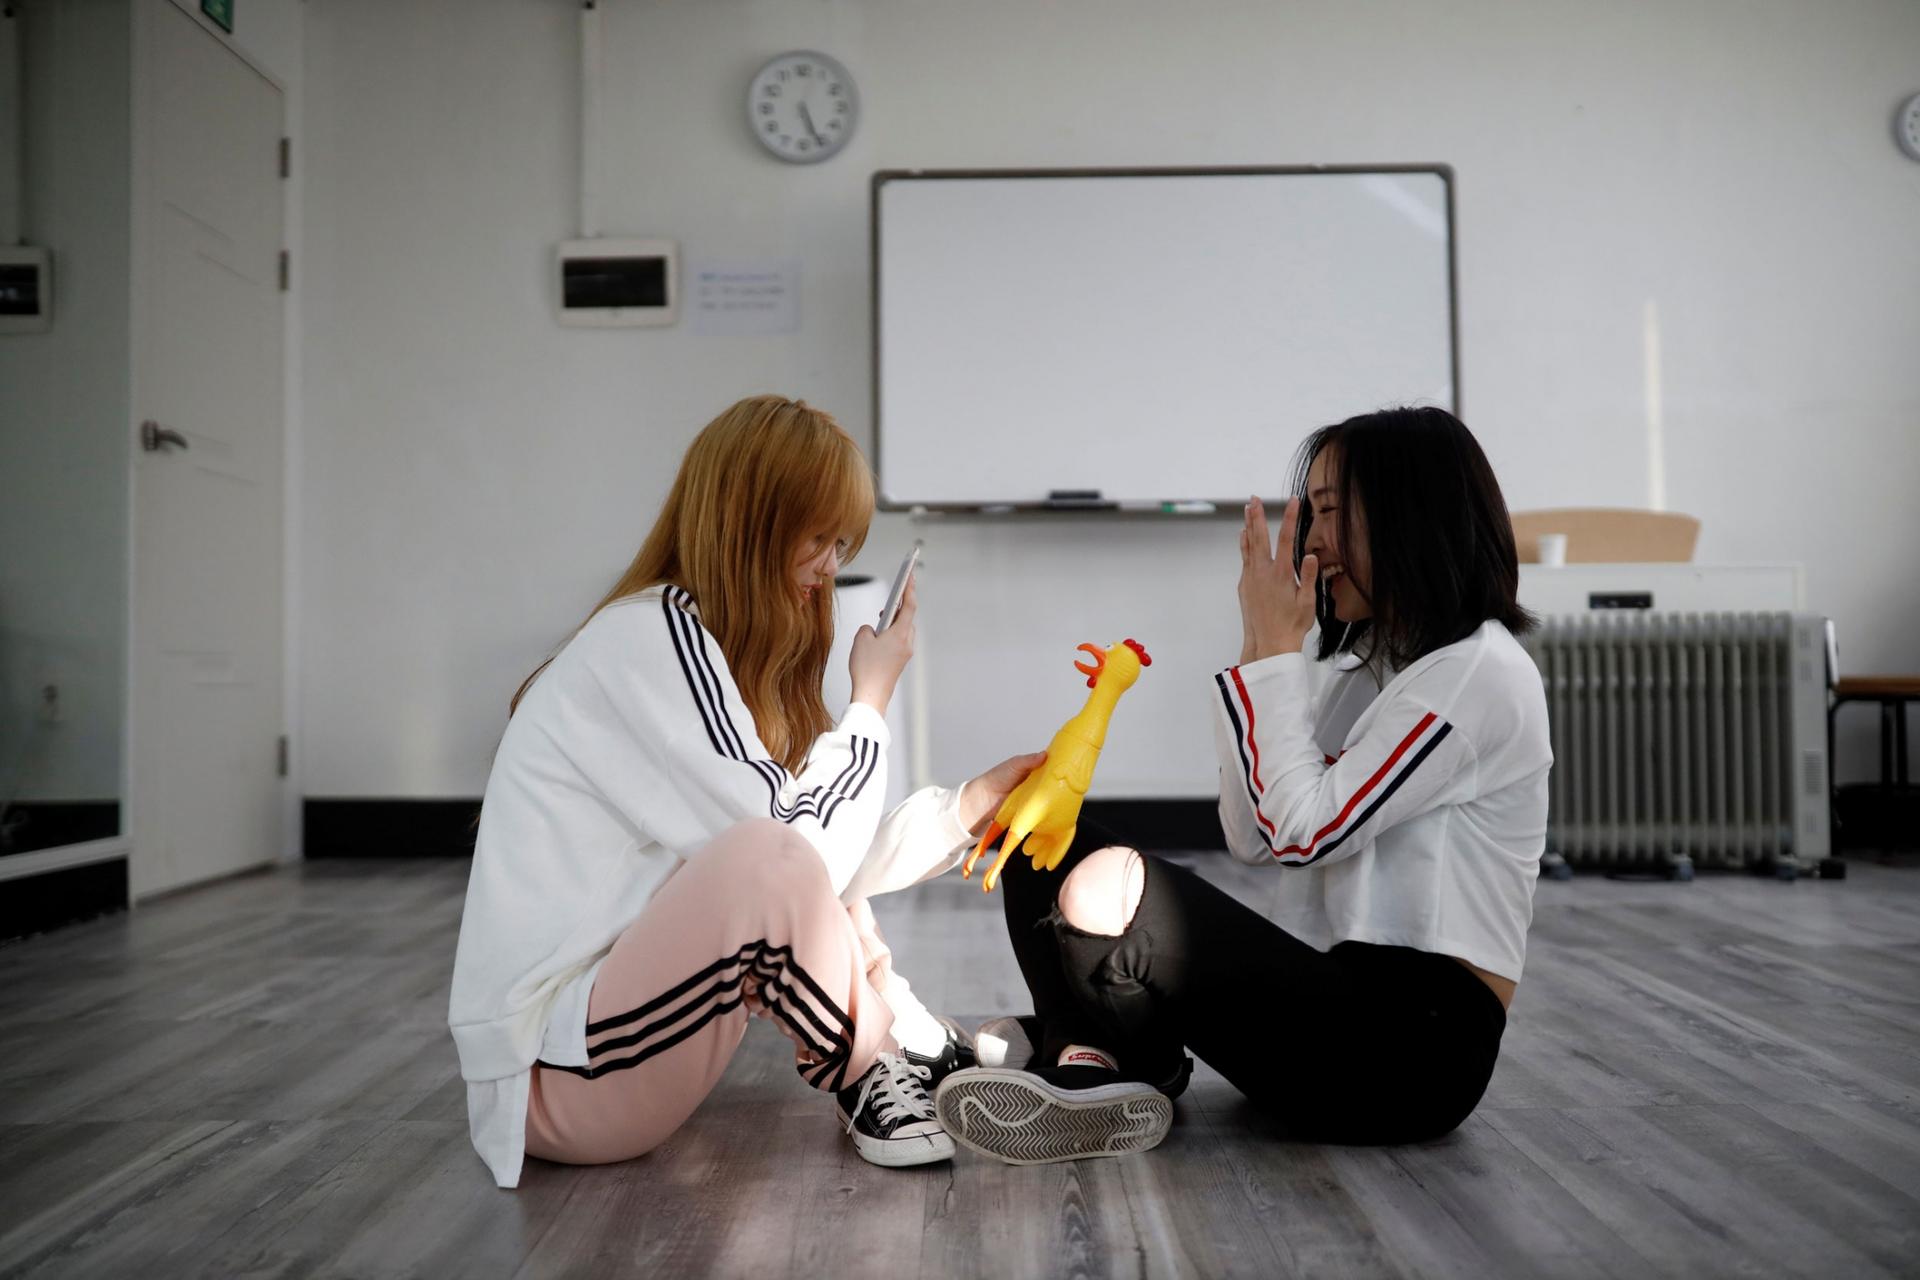 Two young women are shown sitting on the floor with one holding a yellow rubber chicken and taking a photo with her mobile phone.